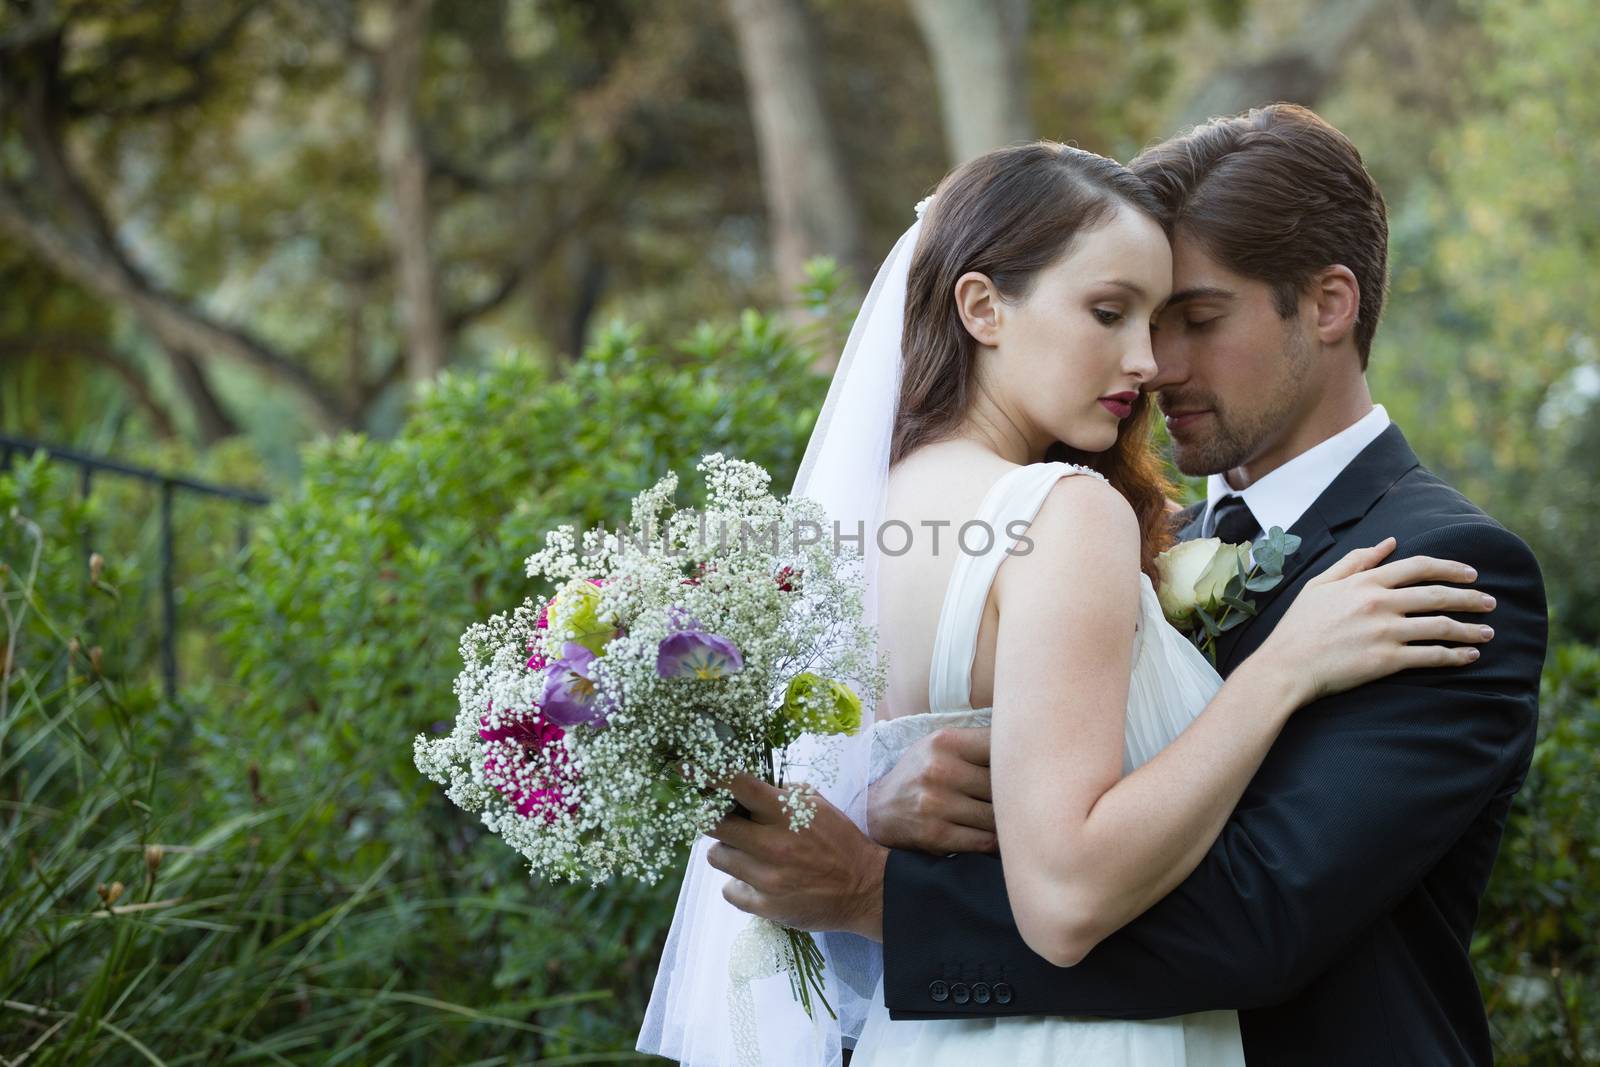 Romantic couple with eyes closed embracing while standing in park